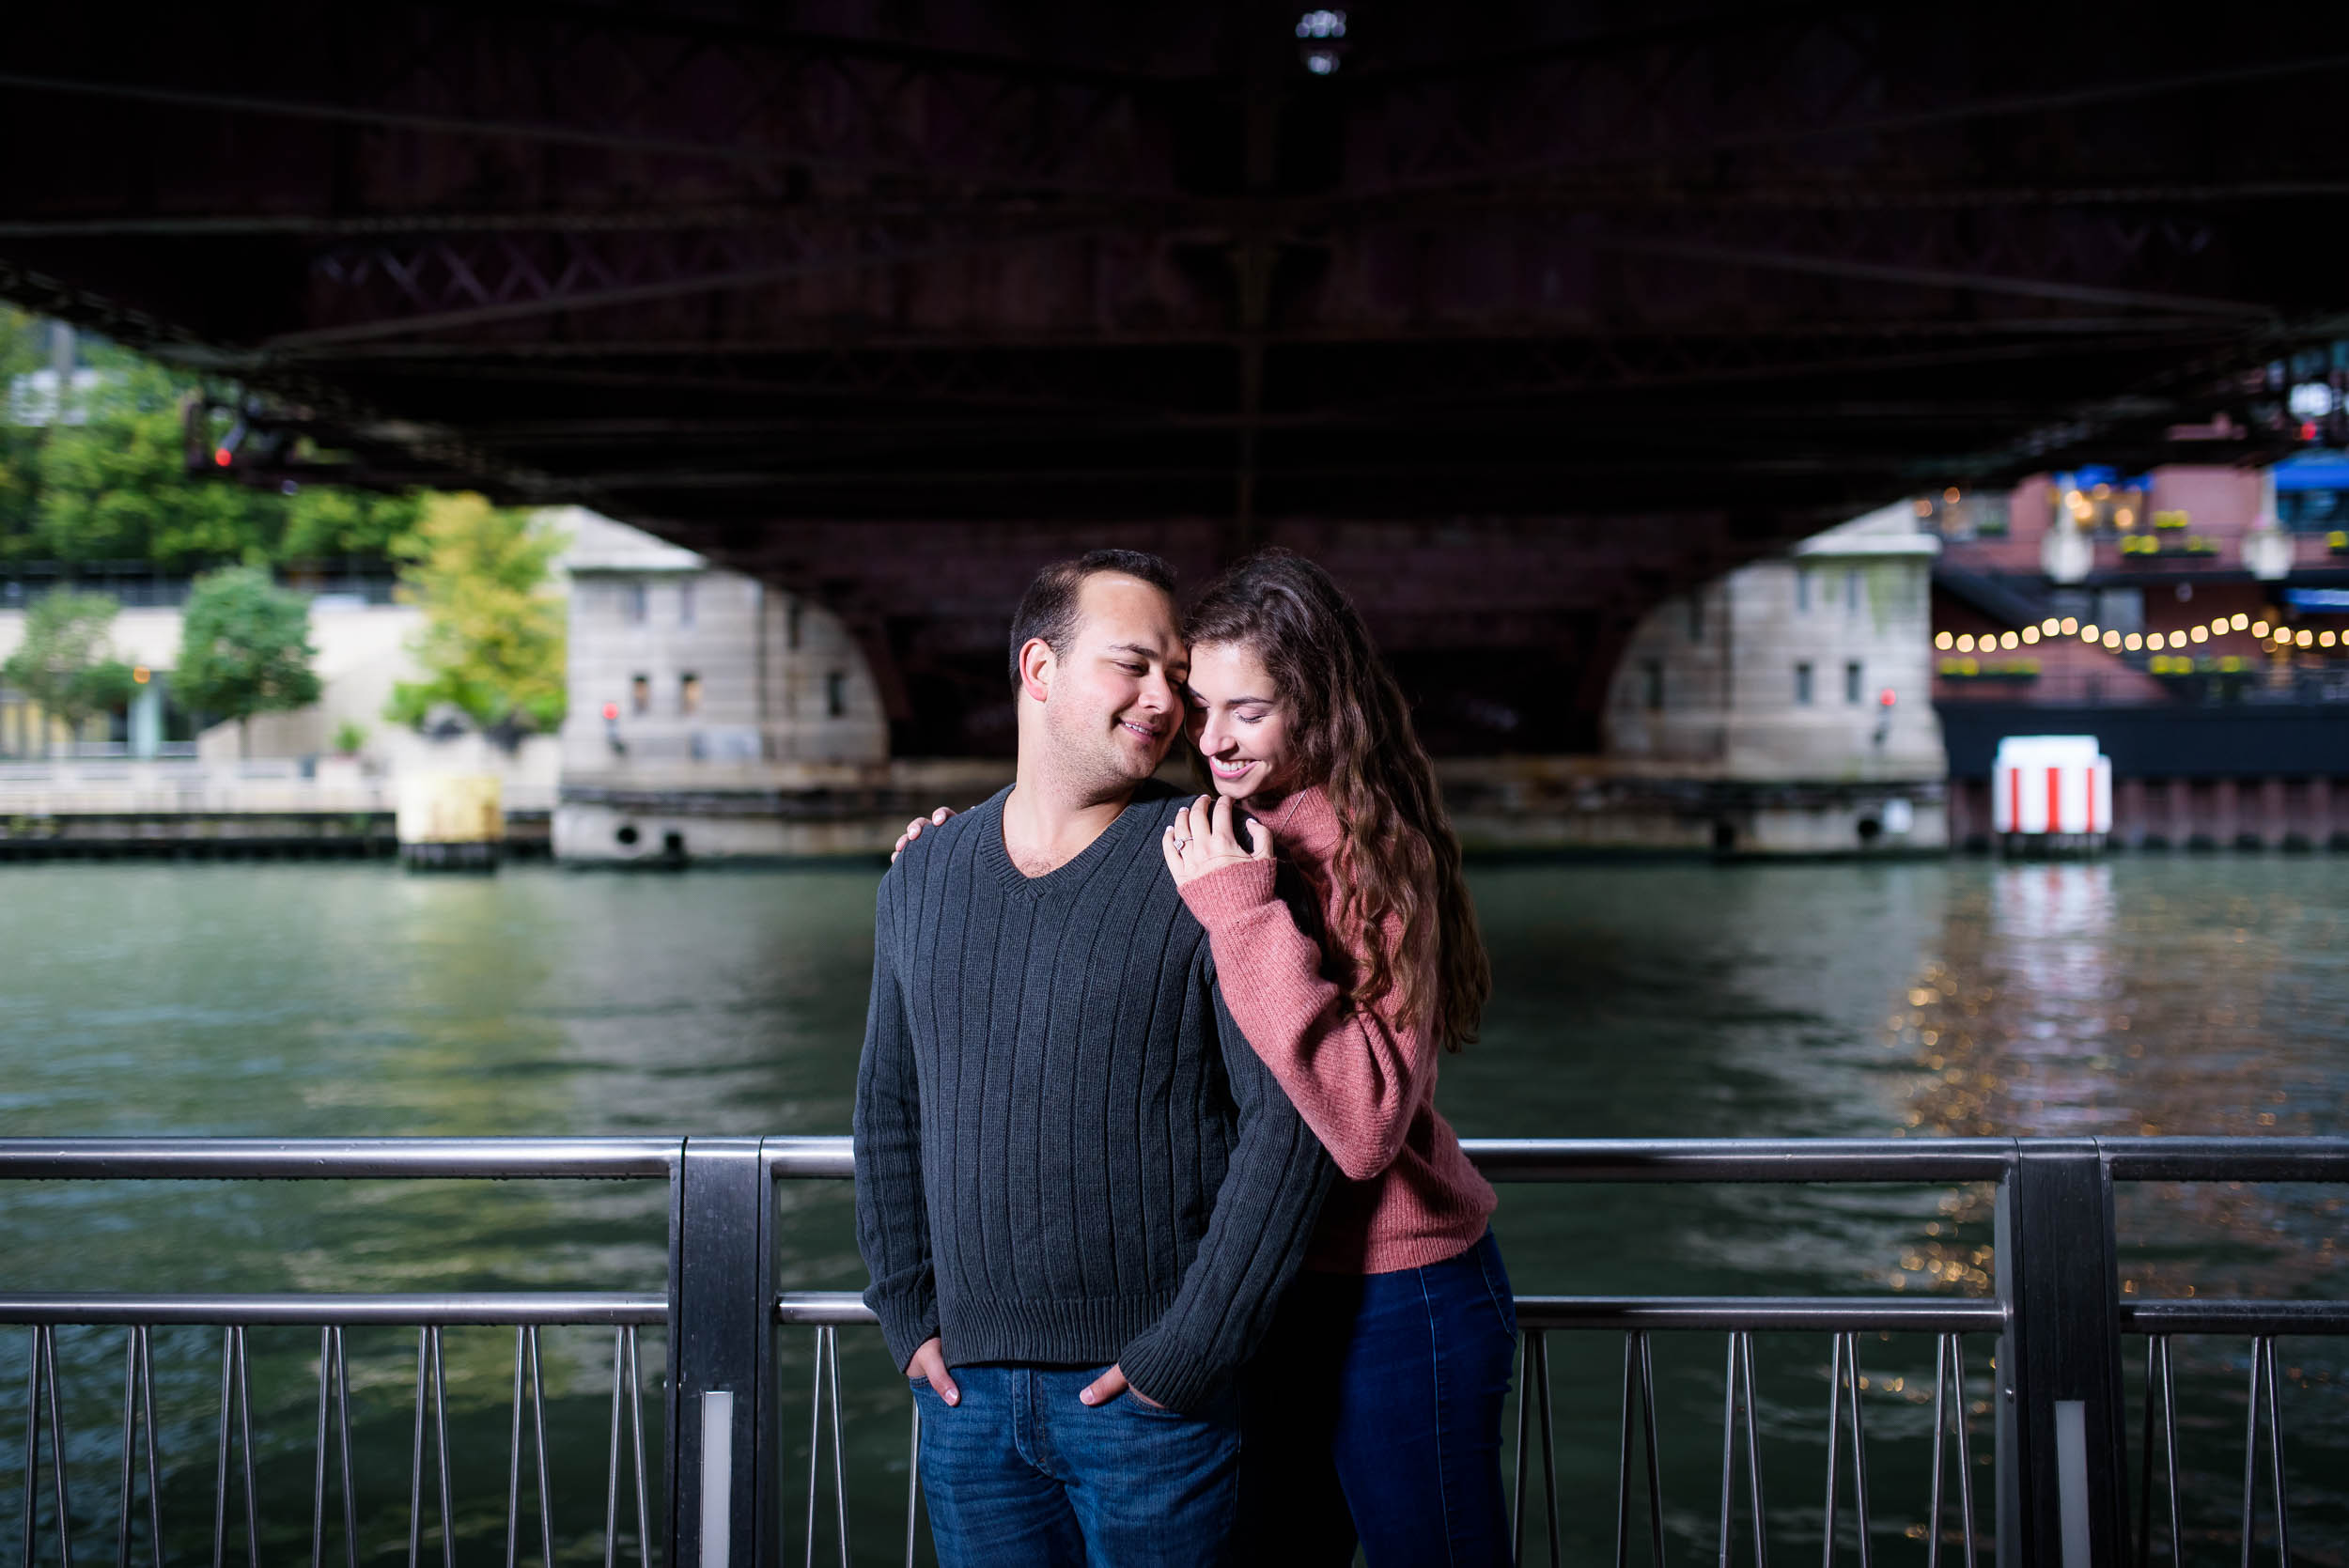 Downtown Chicago engagement session captured by J. Brown Photography. See more engagement photo ideas at jbrownphotography.com!